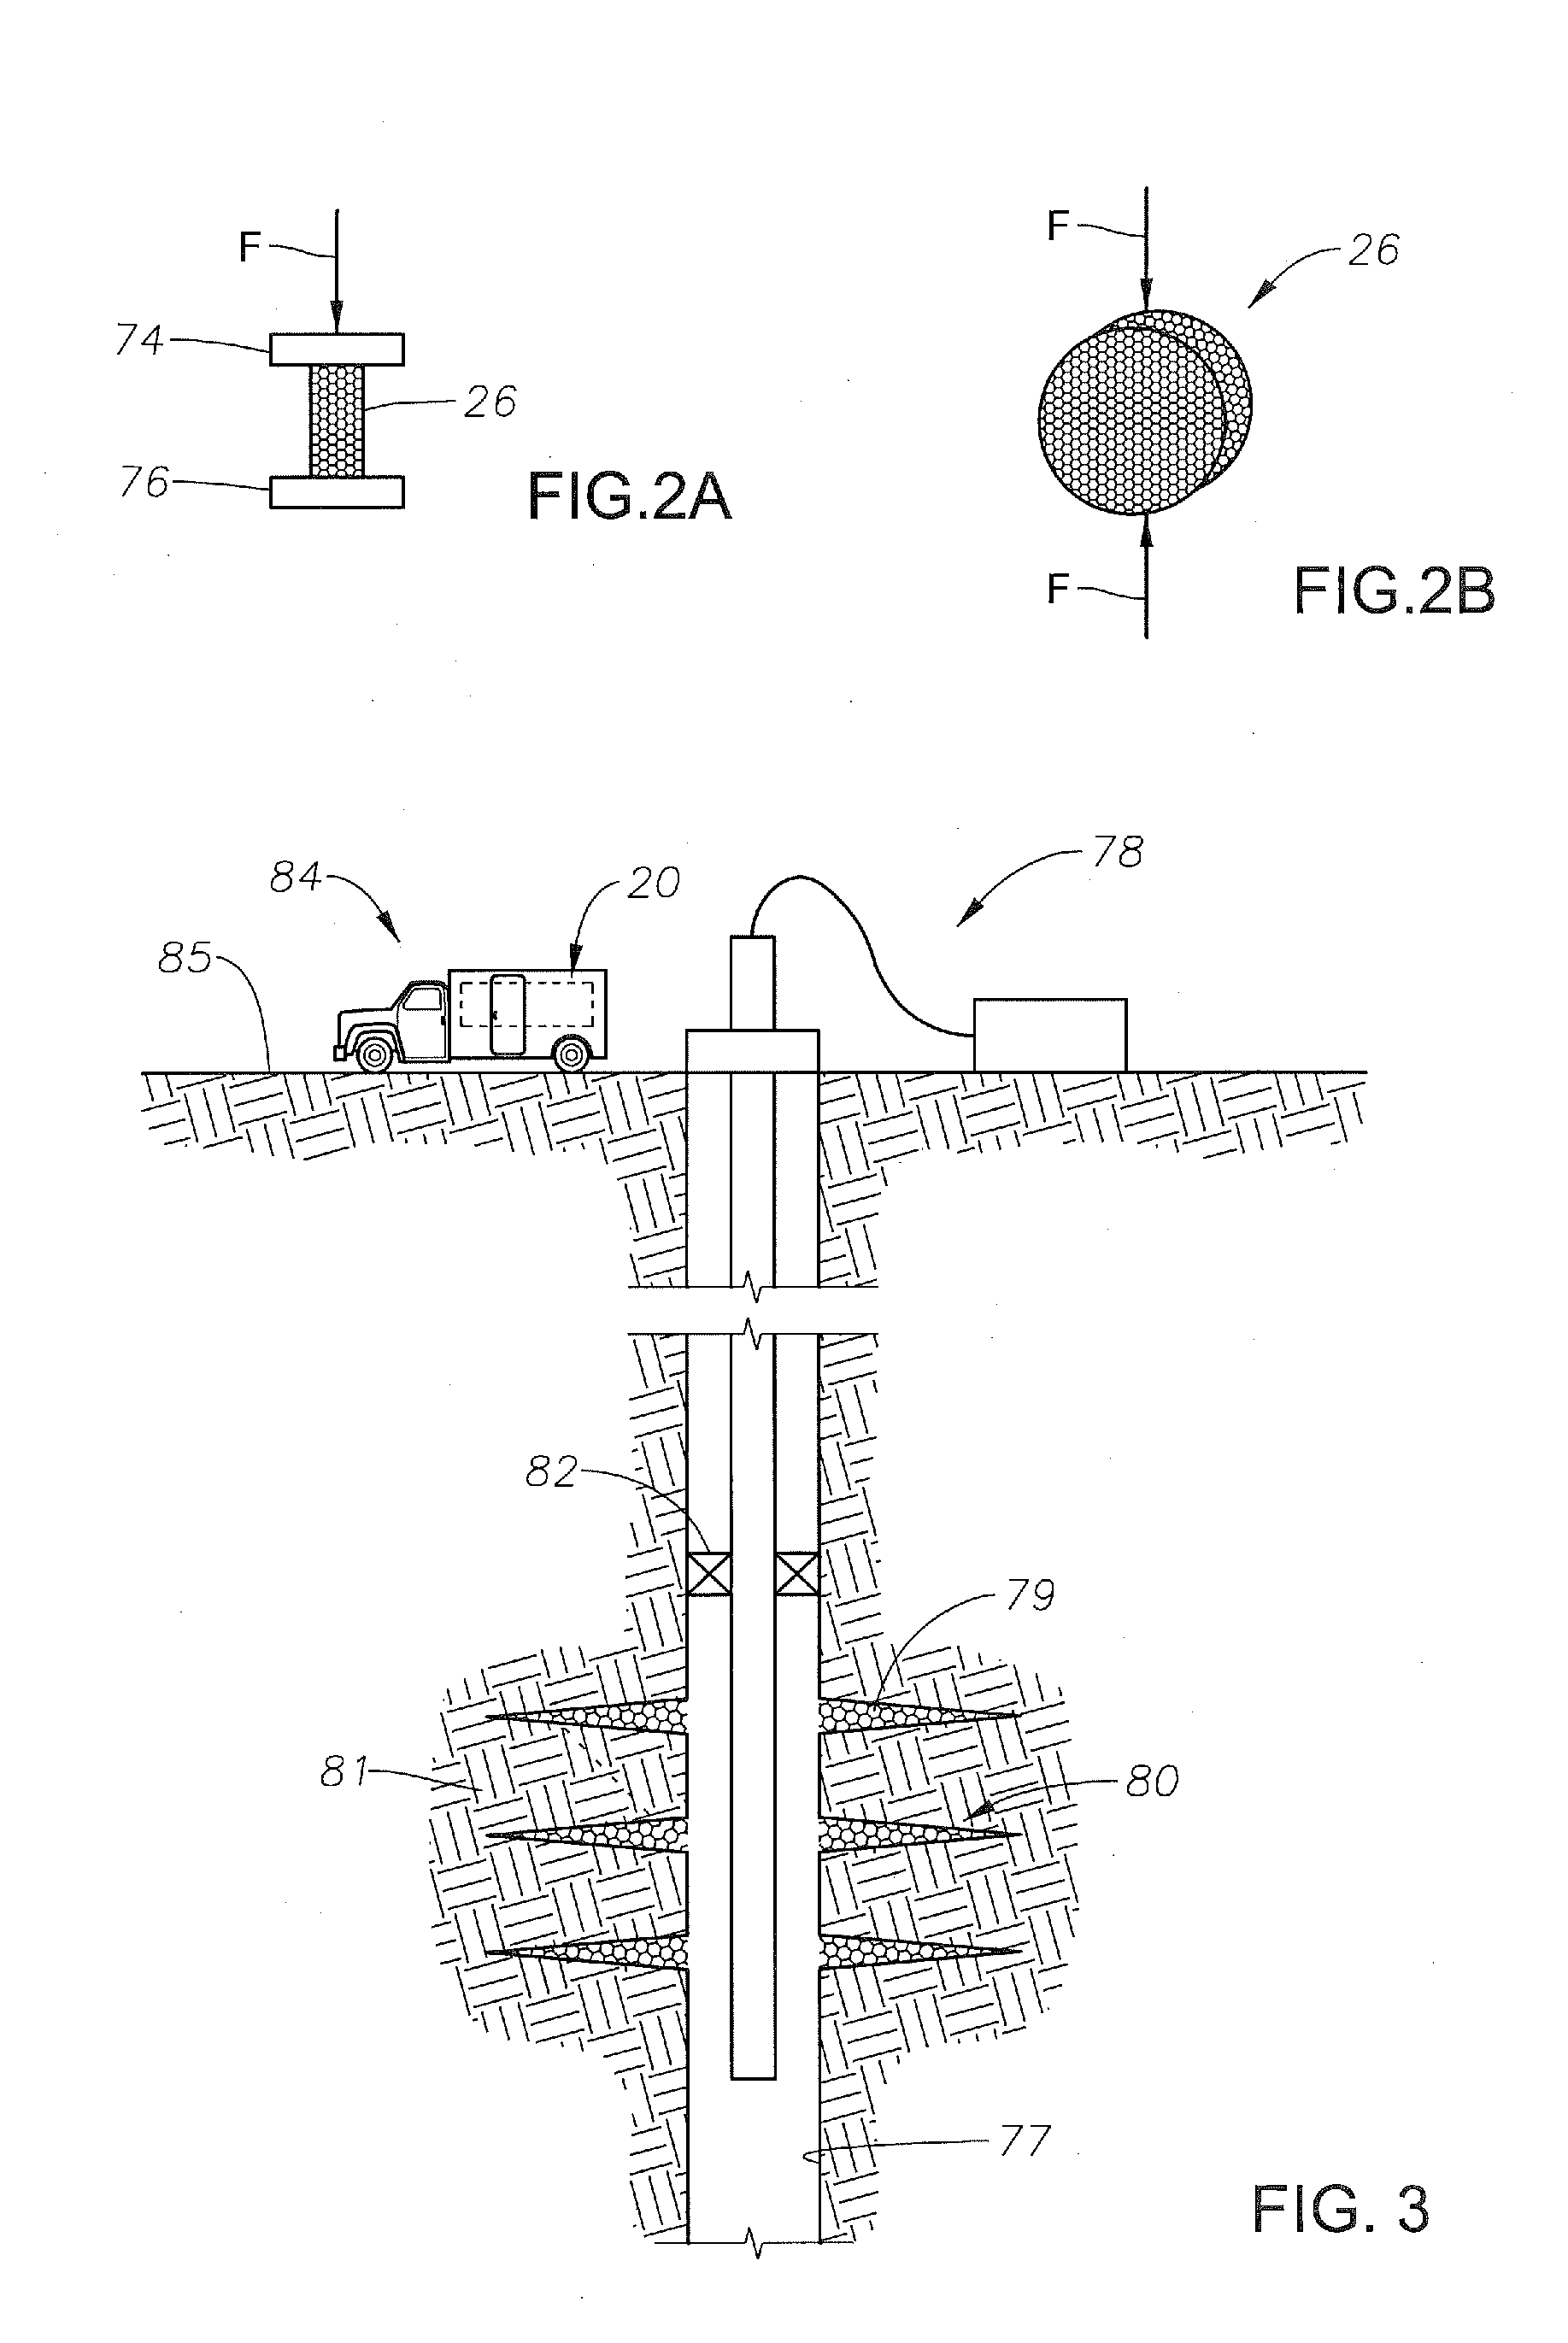 Portable device and method for field testing proppant